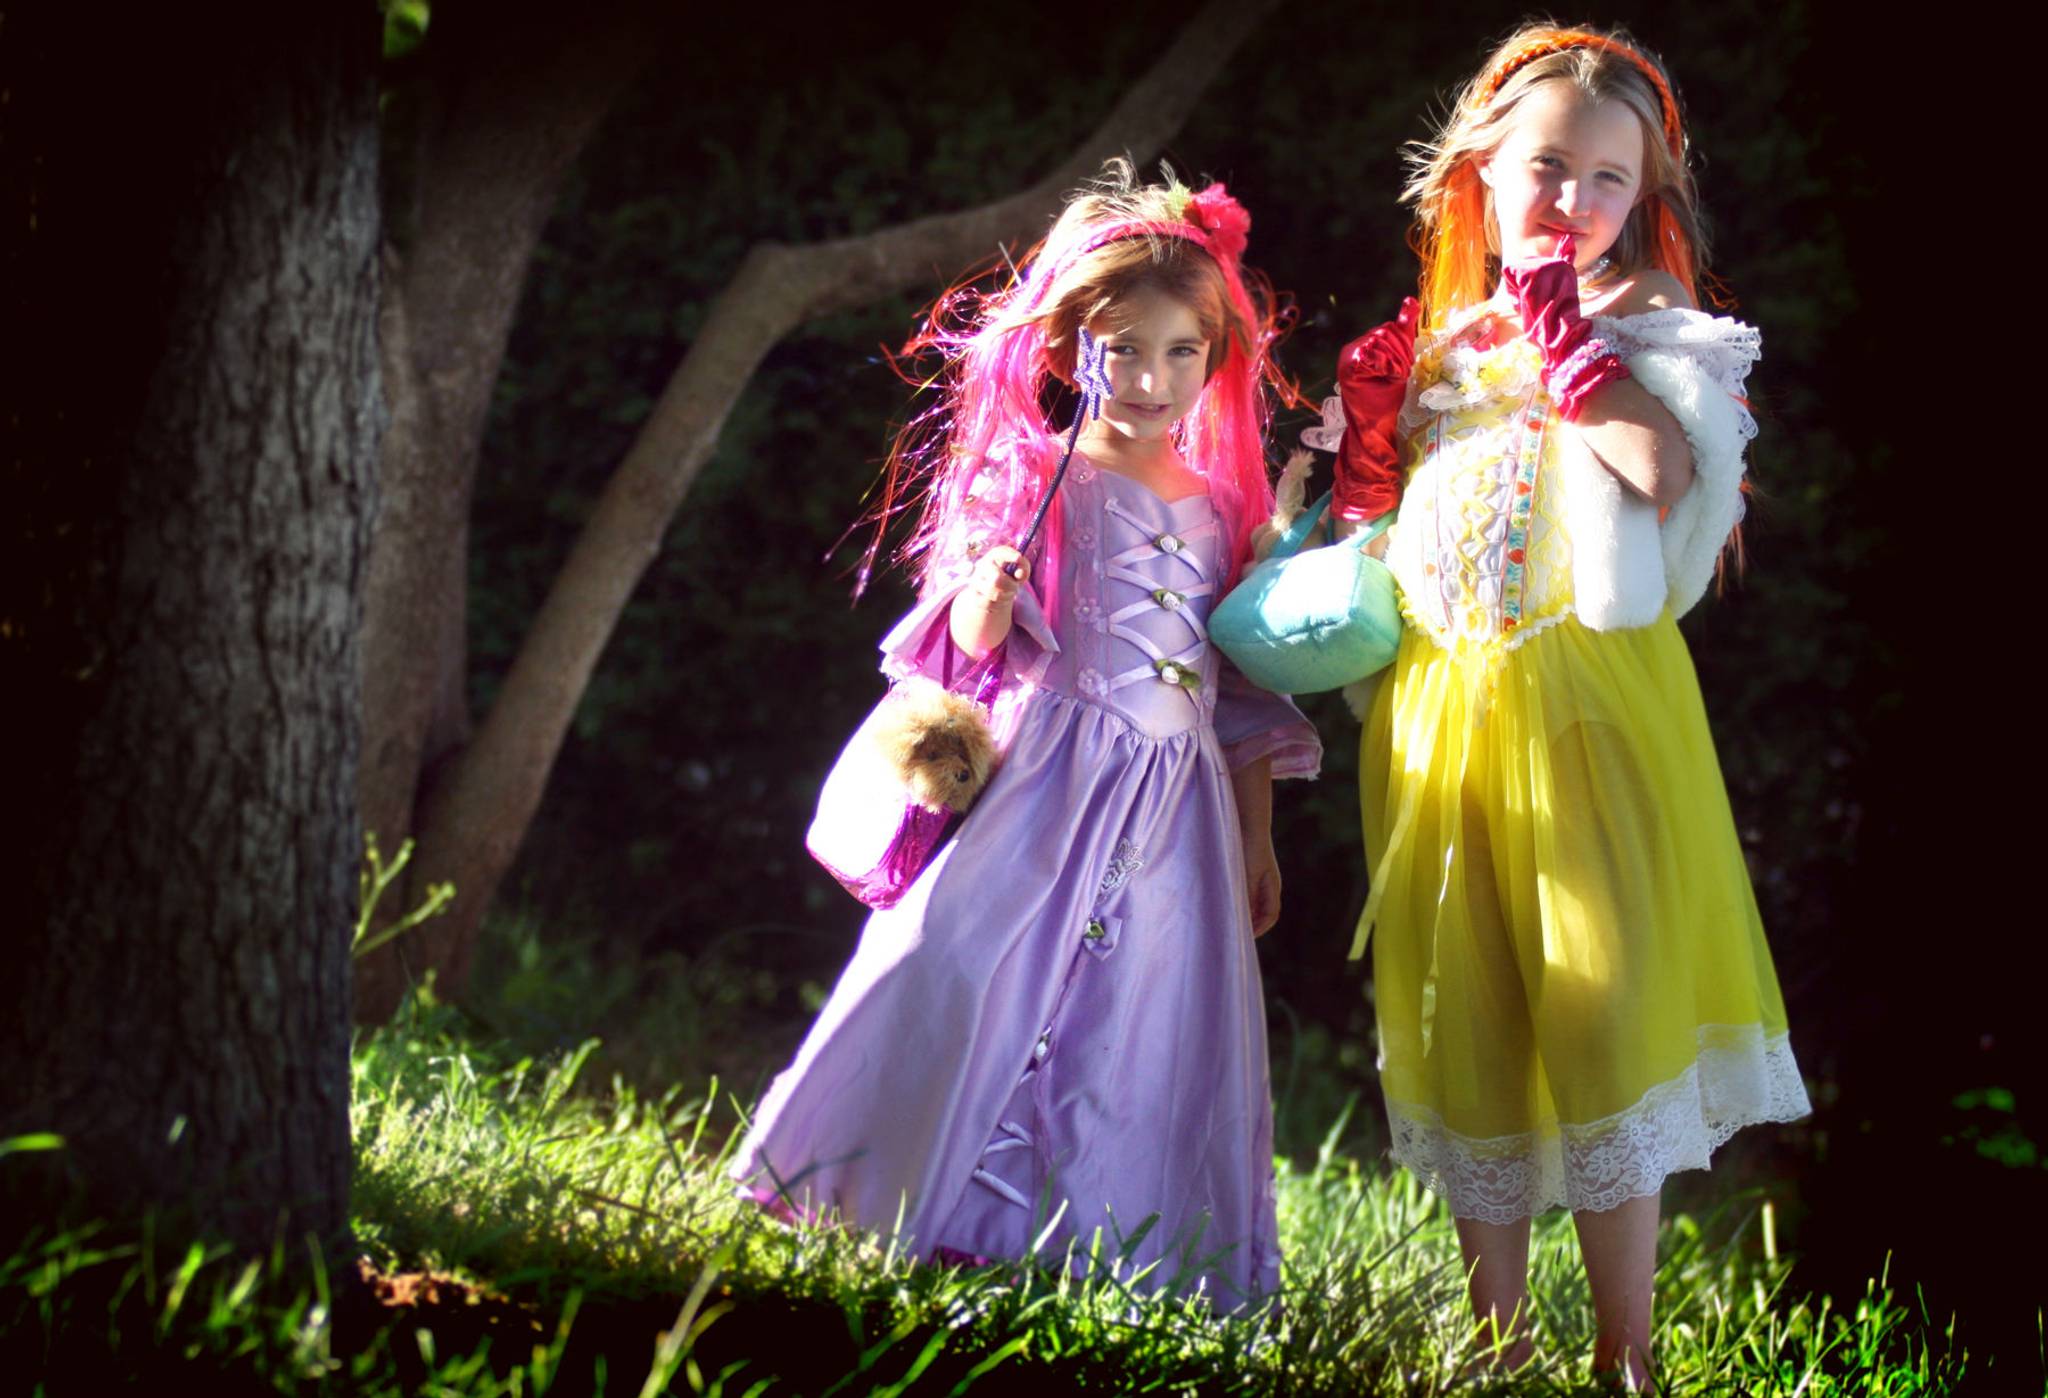 Parents pay for girls to feel like princesses